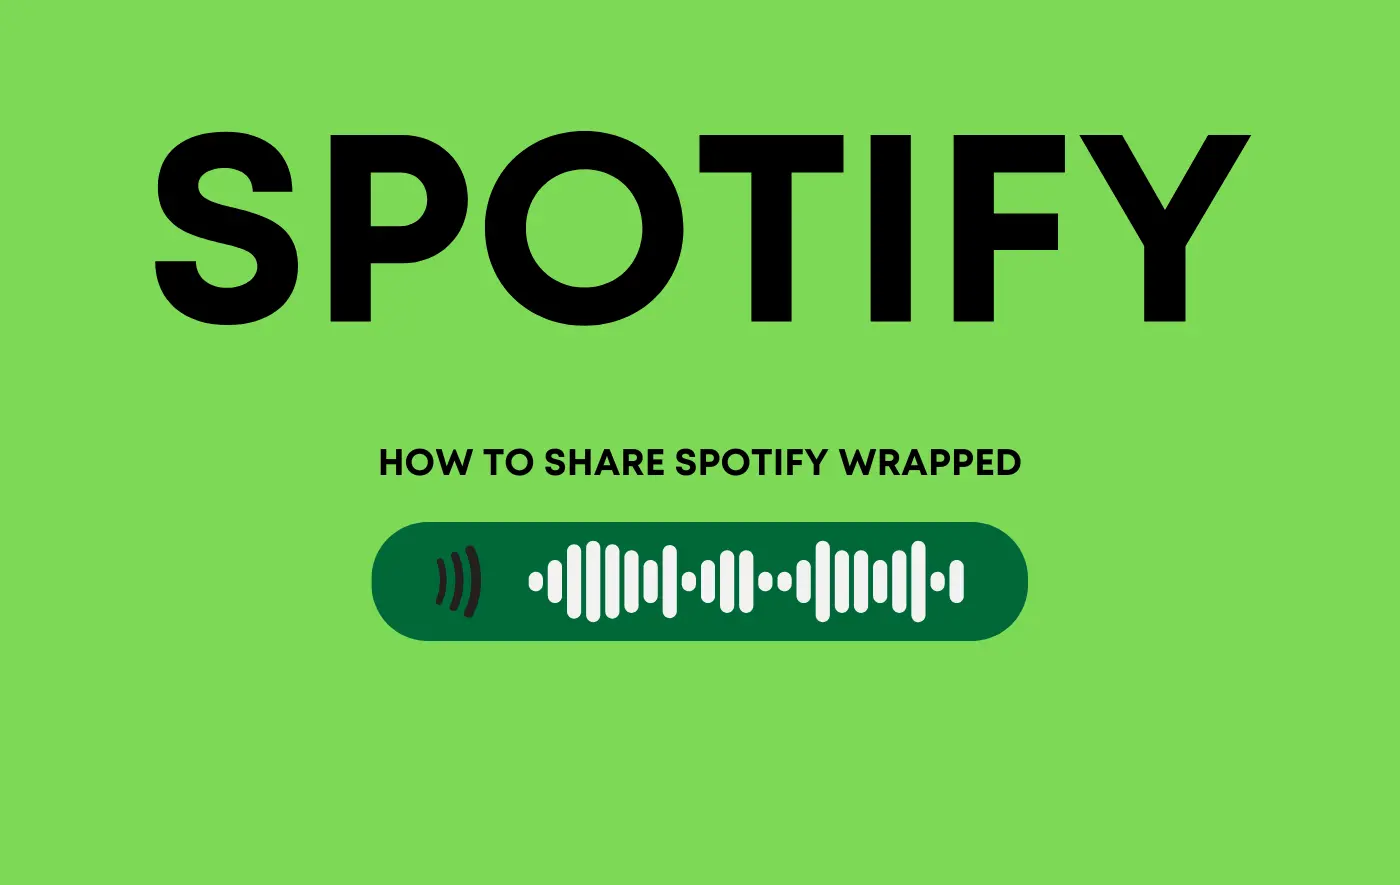 How To Share Spotify Wrapped